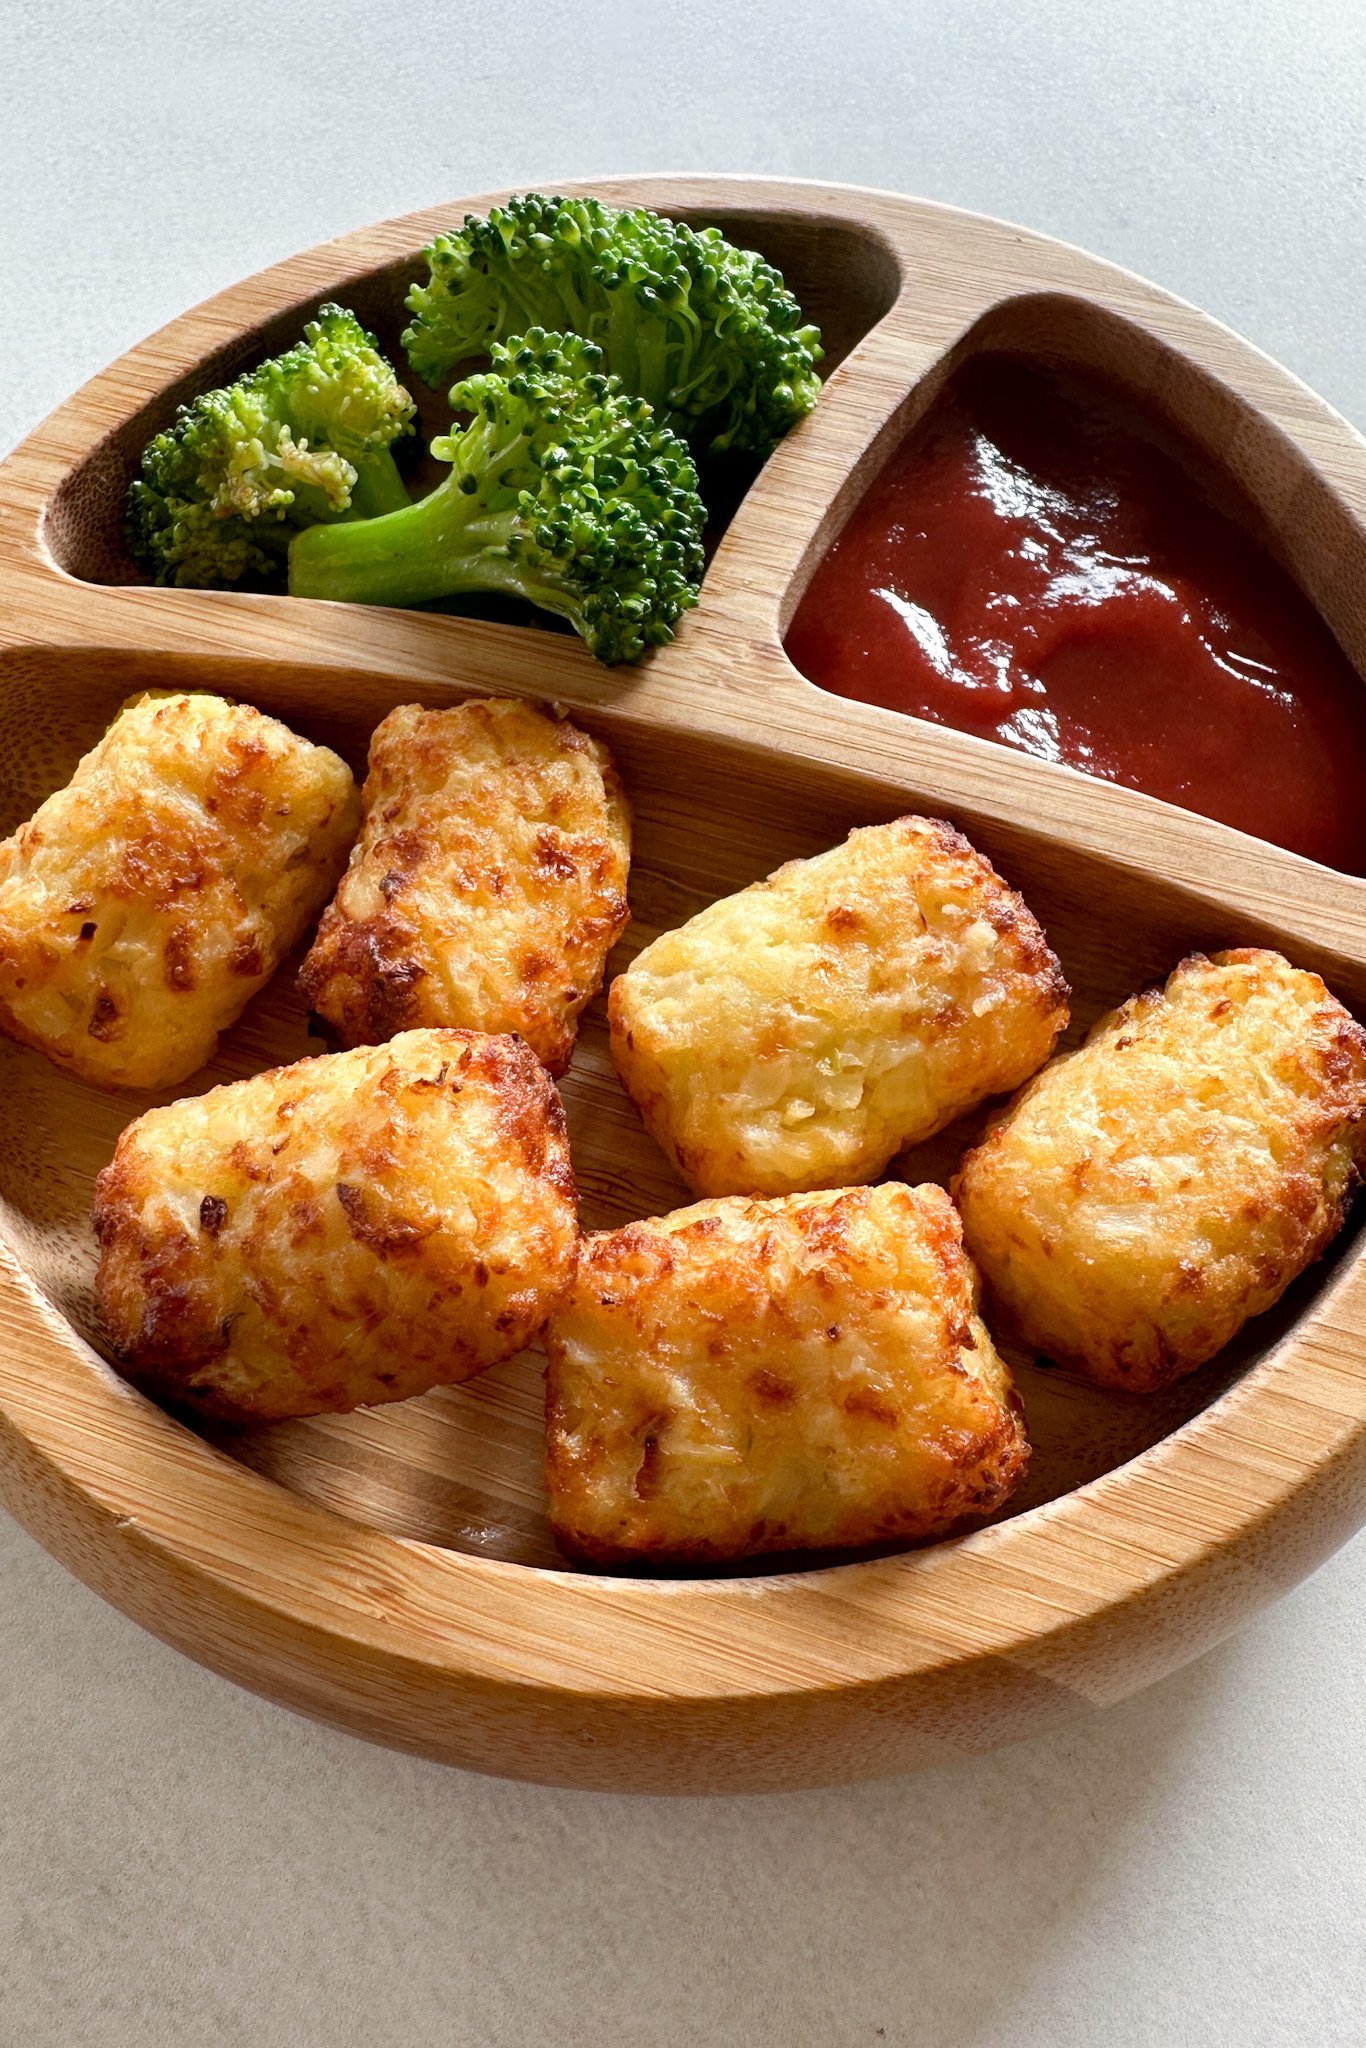 Air fryer cauliflower tots served with broccoli and ketchup.